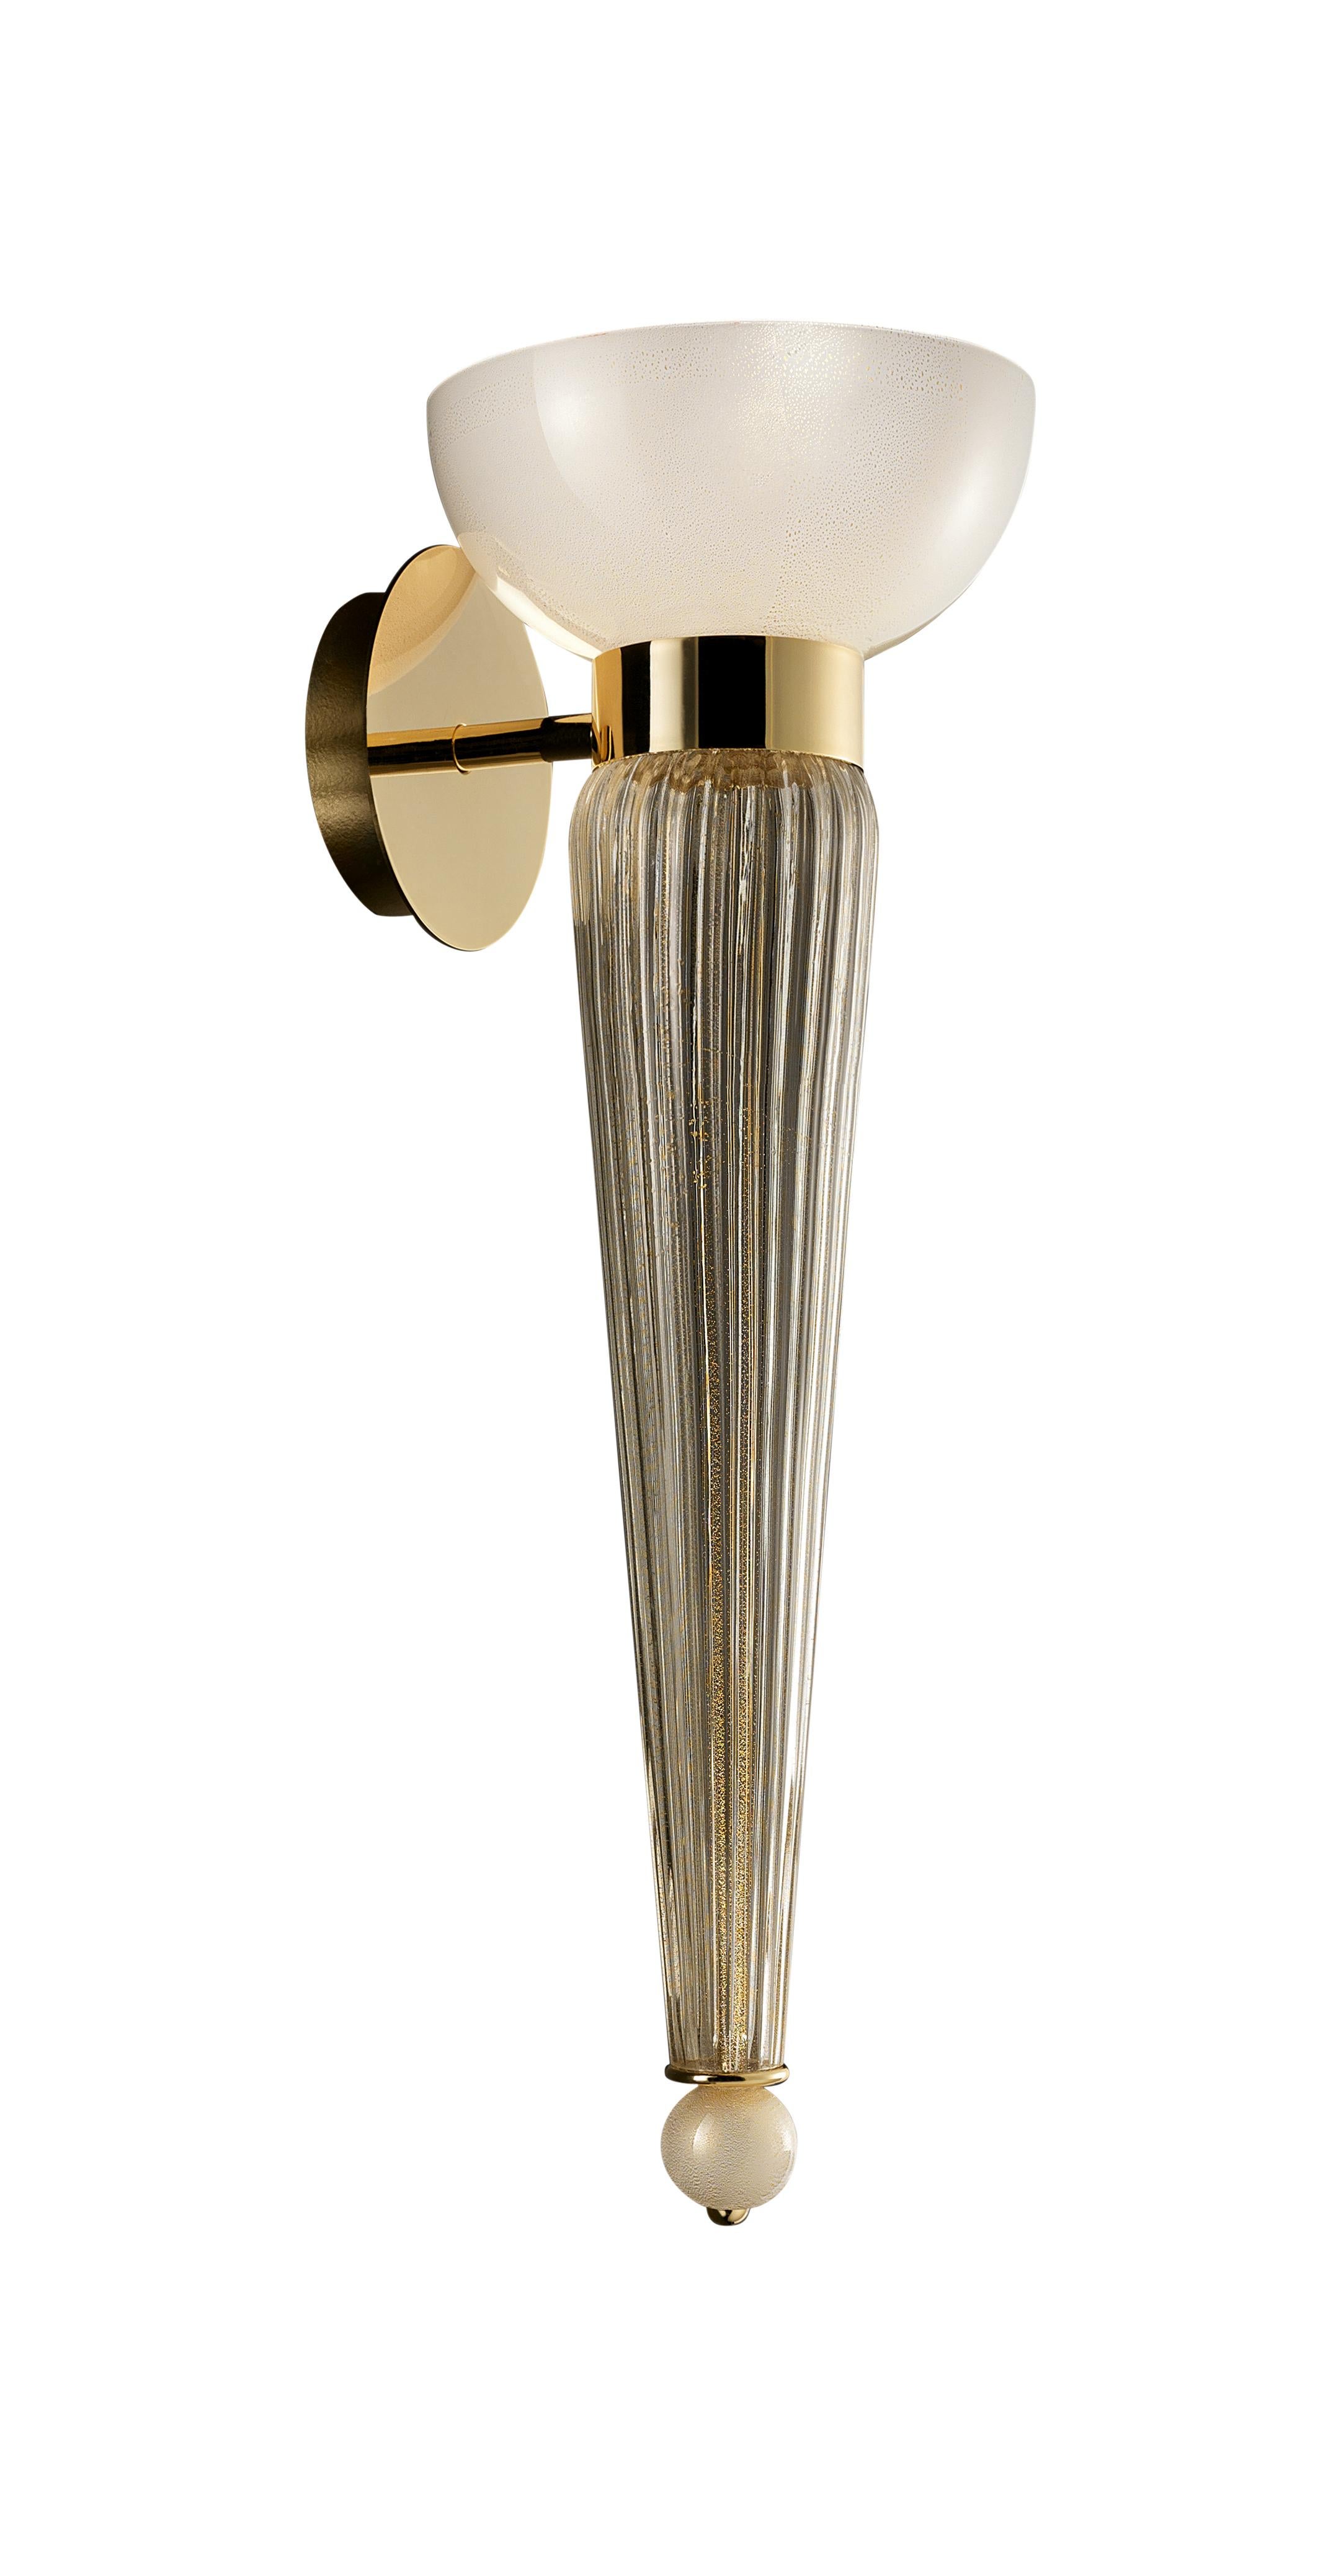 Beige (Beige Gold_OB) Torvik 5656 Wall Sconce in Glass with Galvanized Gold Finish, by Barovier&Toso 2